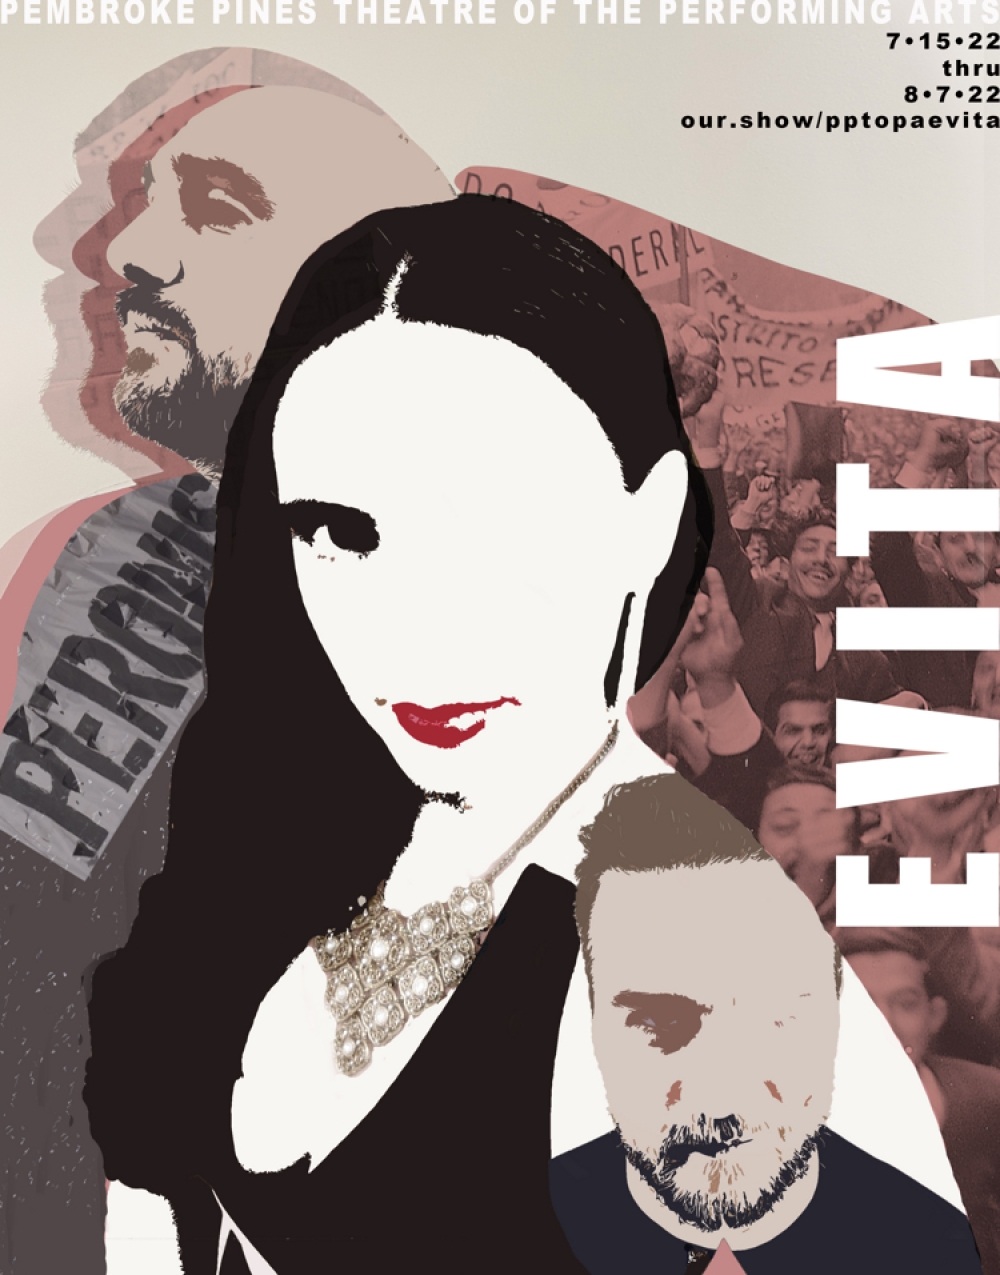 Evita - Pembroke Pines Theatre of the Performing Arts Stage Mag